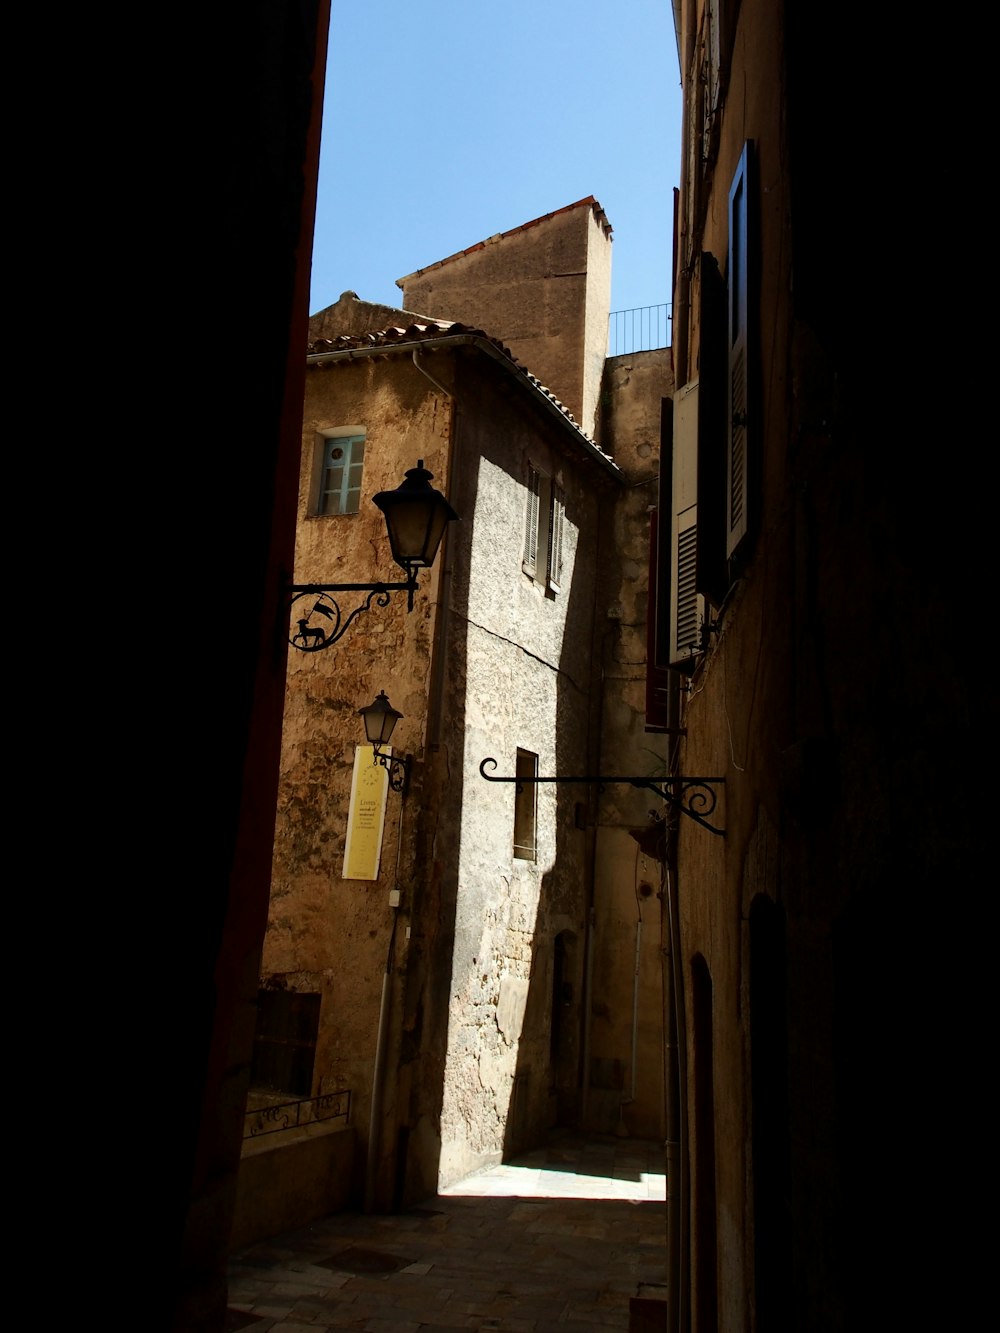 a narrow alley way with a cross on the wall